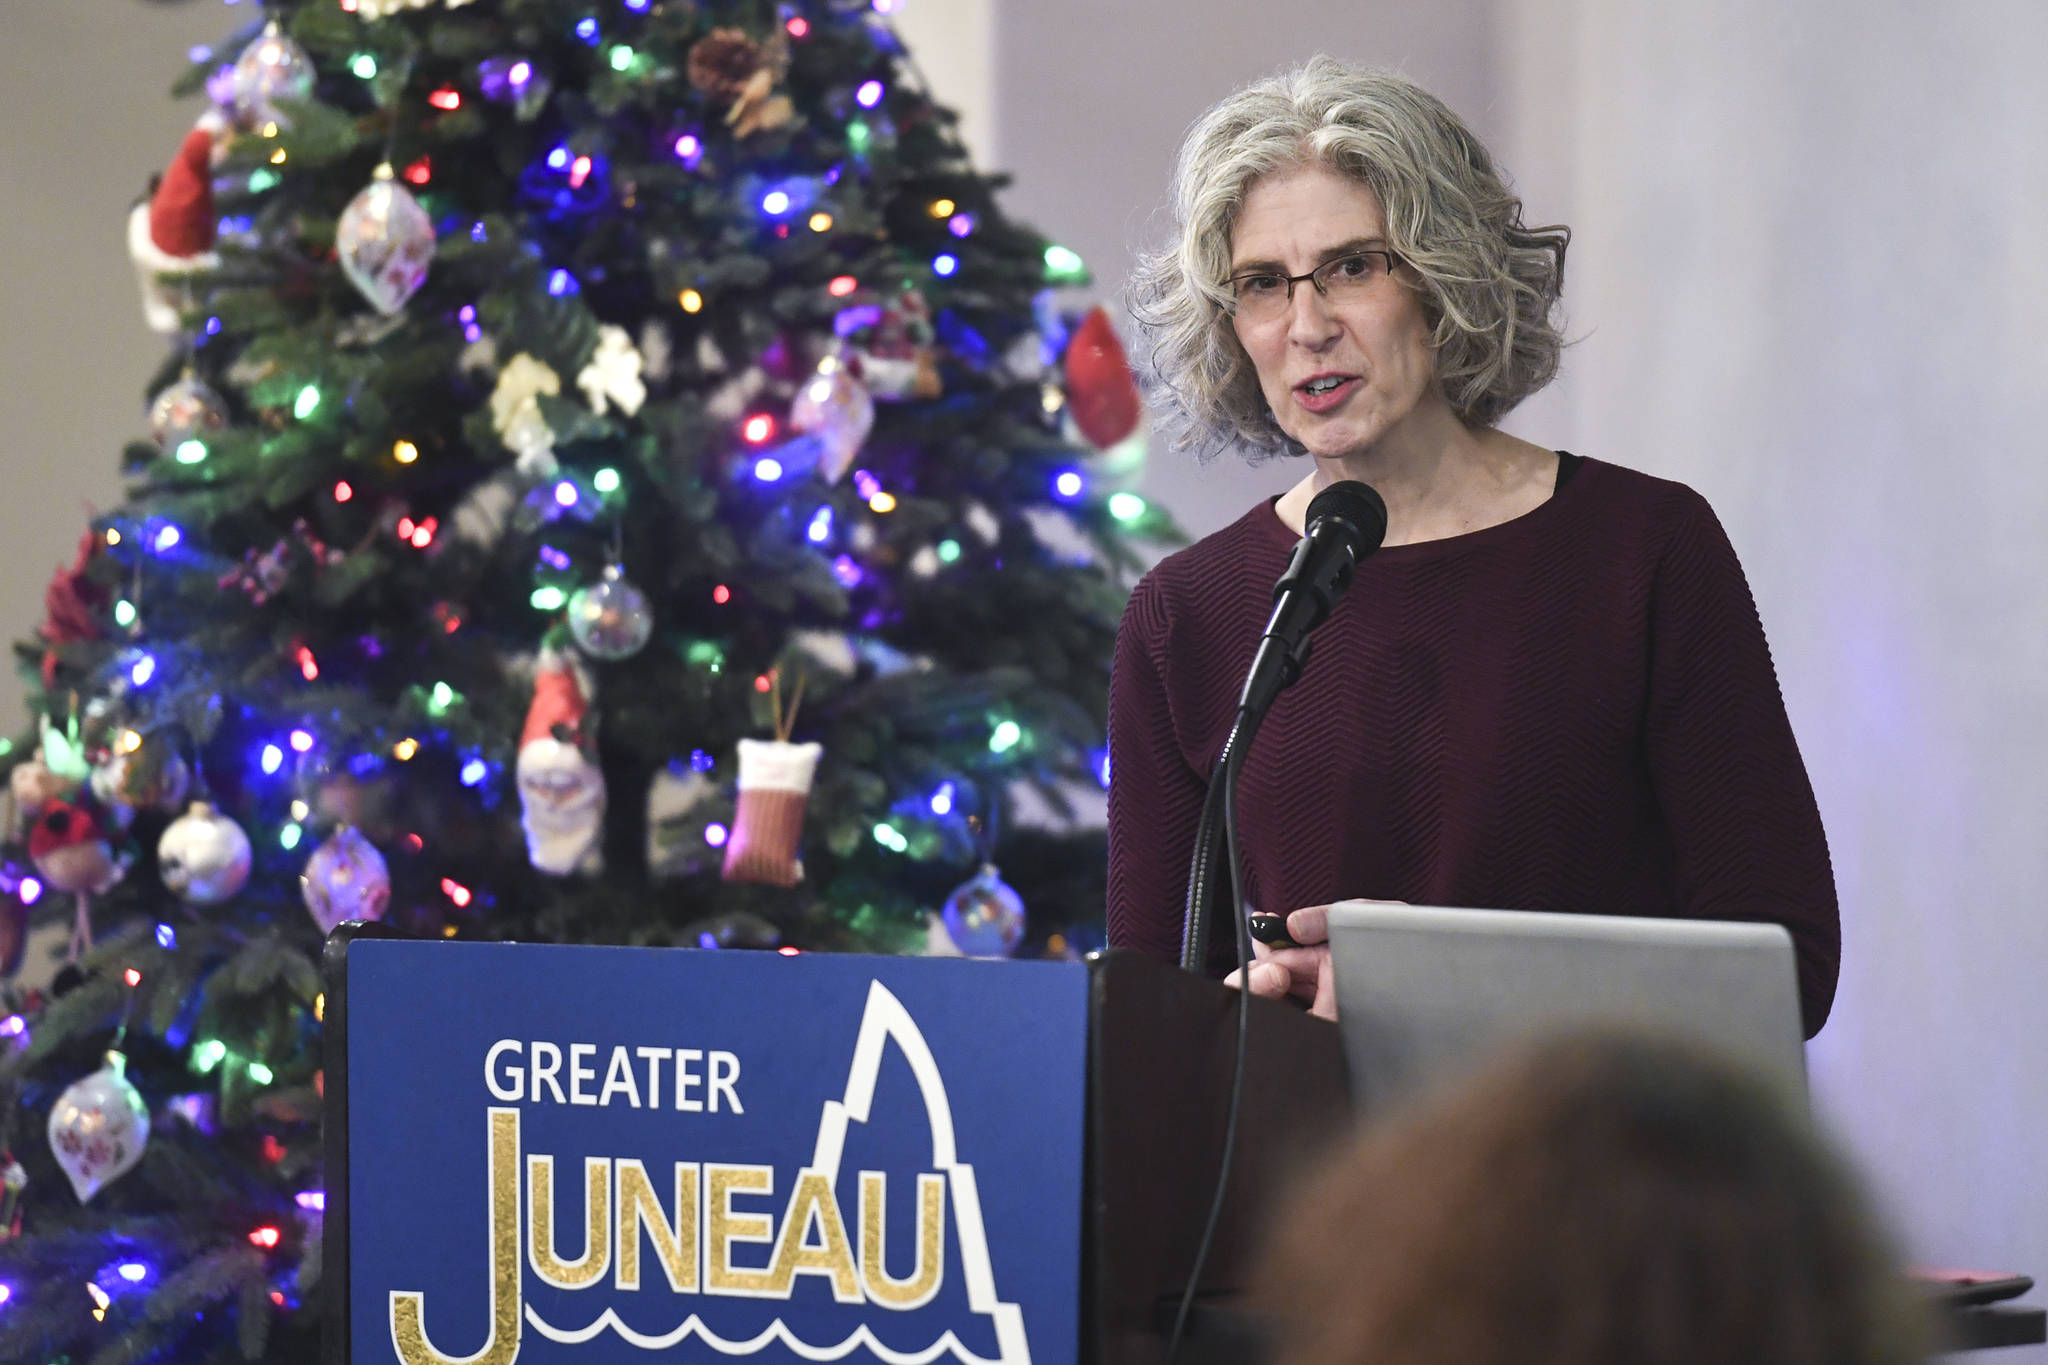 Lorrie Heagy, program director of Juneau Alaska Music Matters (JAMM), speaks to the Juneau Chamber of Commerce during its luncheon at the Moose Lodge on Thursday, Dec. 19, 2019. (Michael Penn | Juneau Empire)